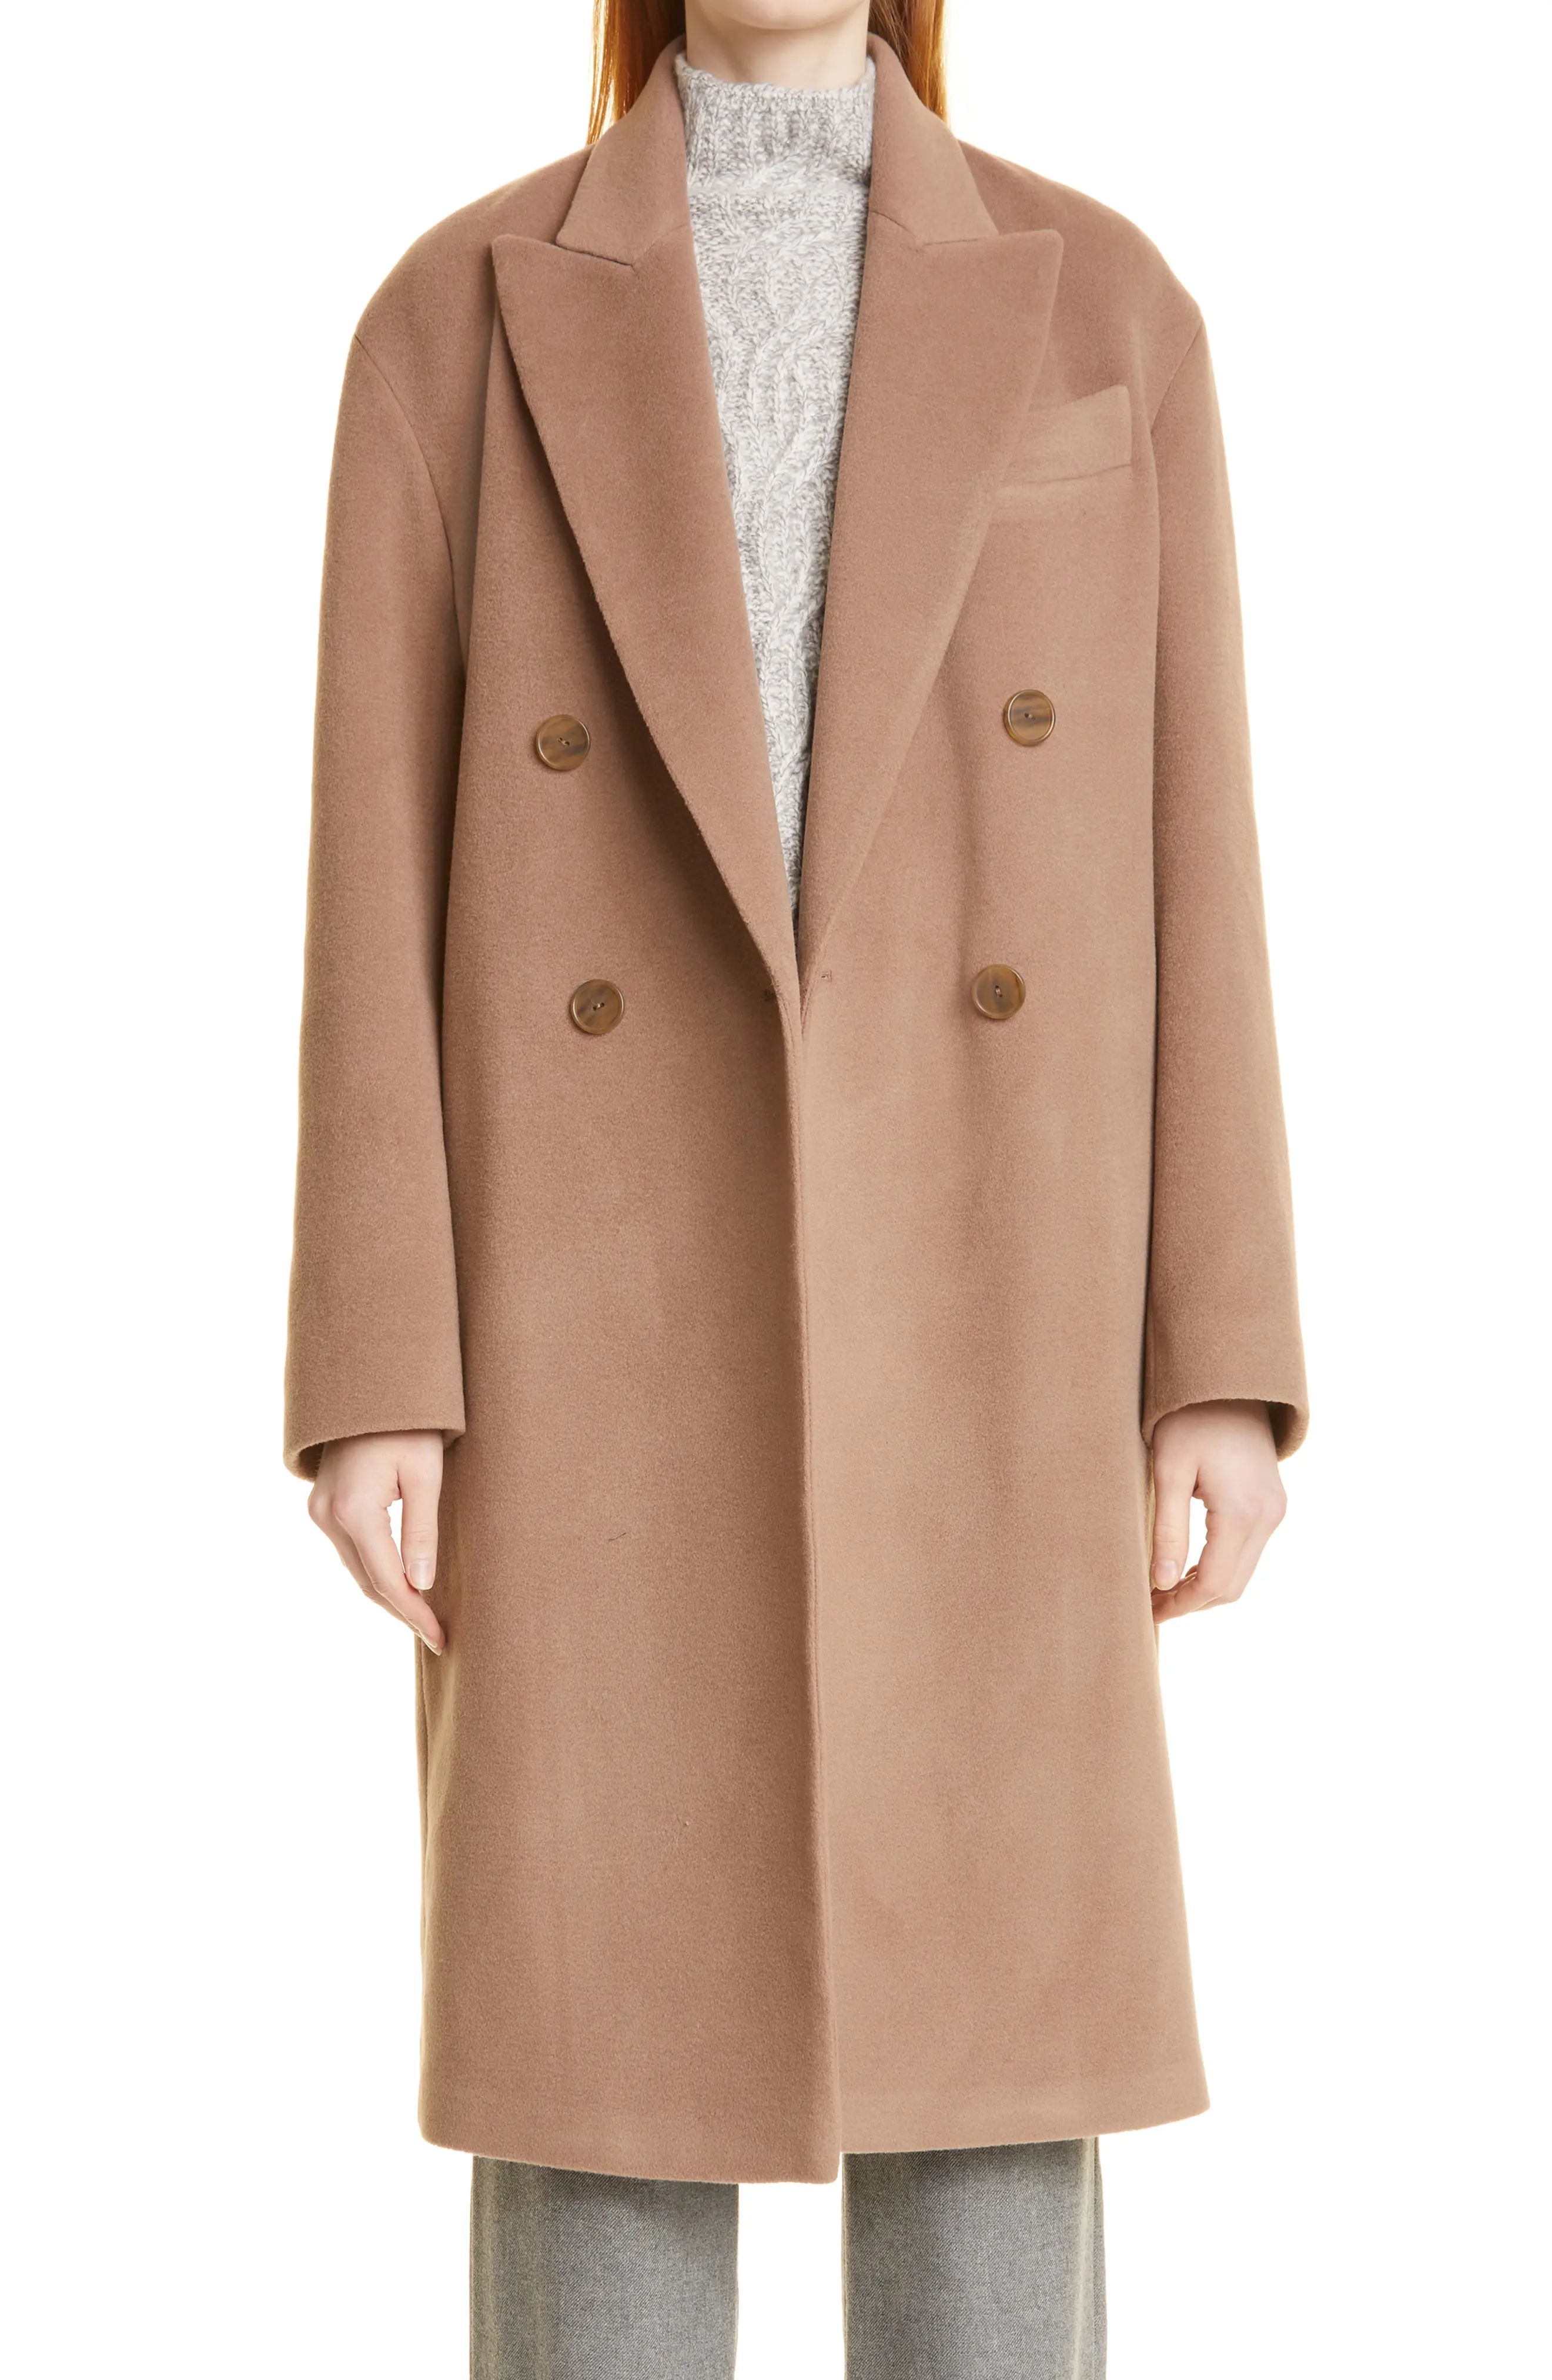 Vince Luxe Wool Double Breasted Coat, Size Large in Mauve Lilac at Nordstrom | Nordstrom